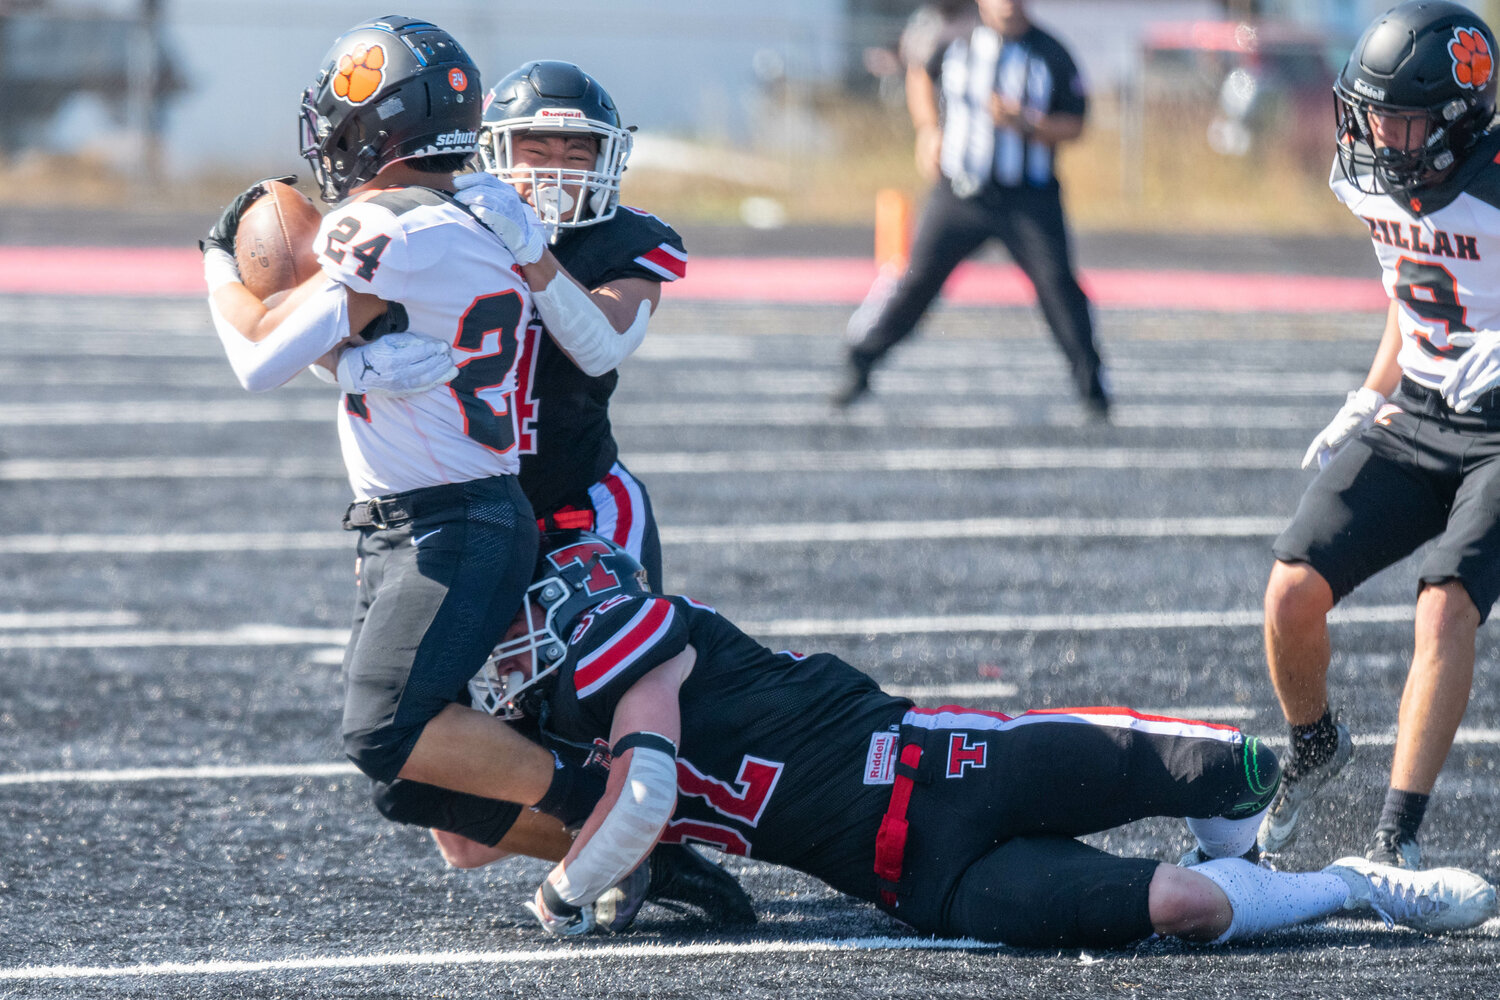 Mikey Vassar (#2) and Lucas Watterson (4) combine to take down Zillah's Yizzy Sandoval during the first half of Tenino's 34-32 loss to Zillah on Sept. 9.